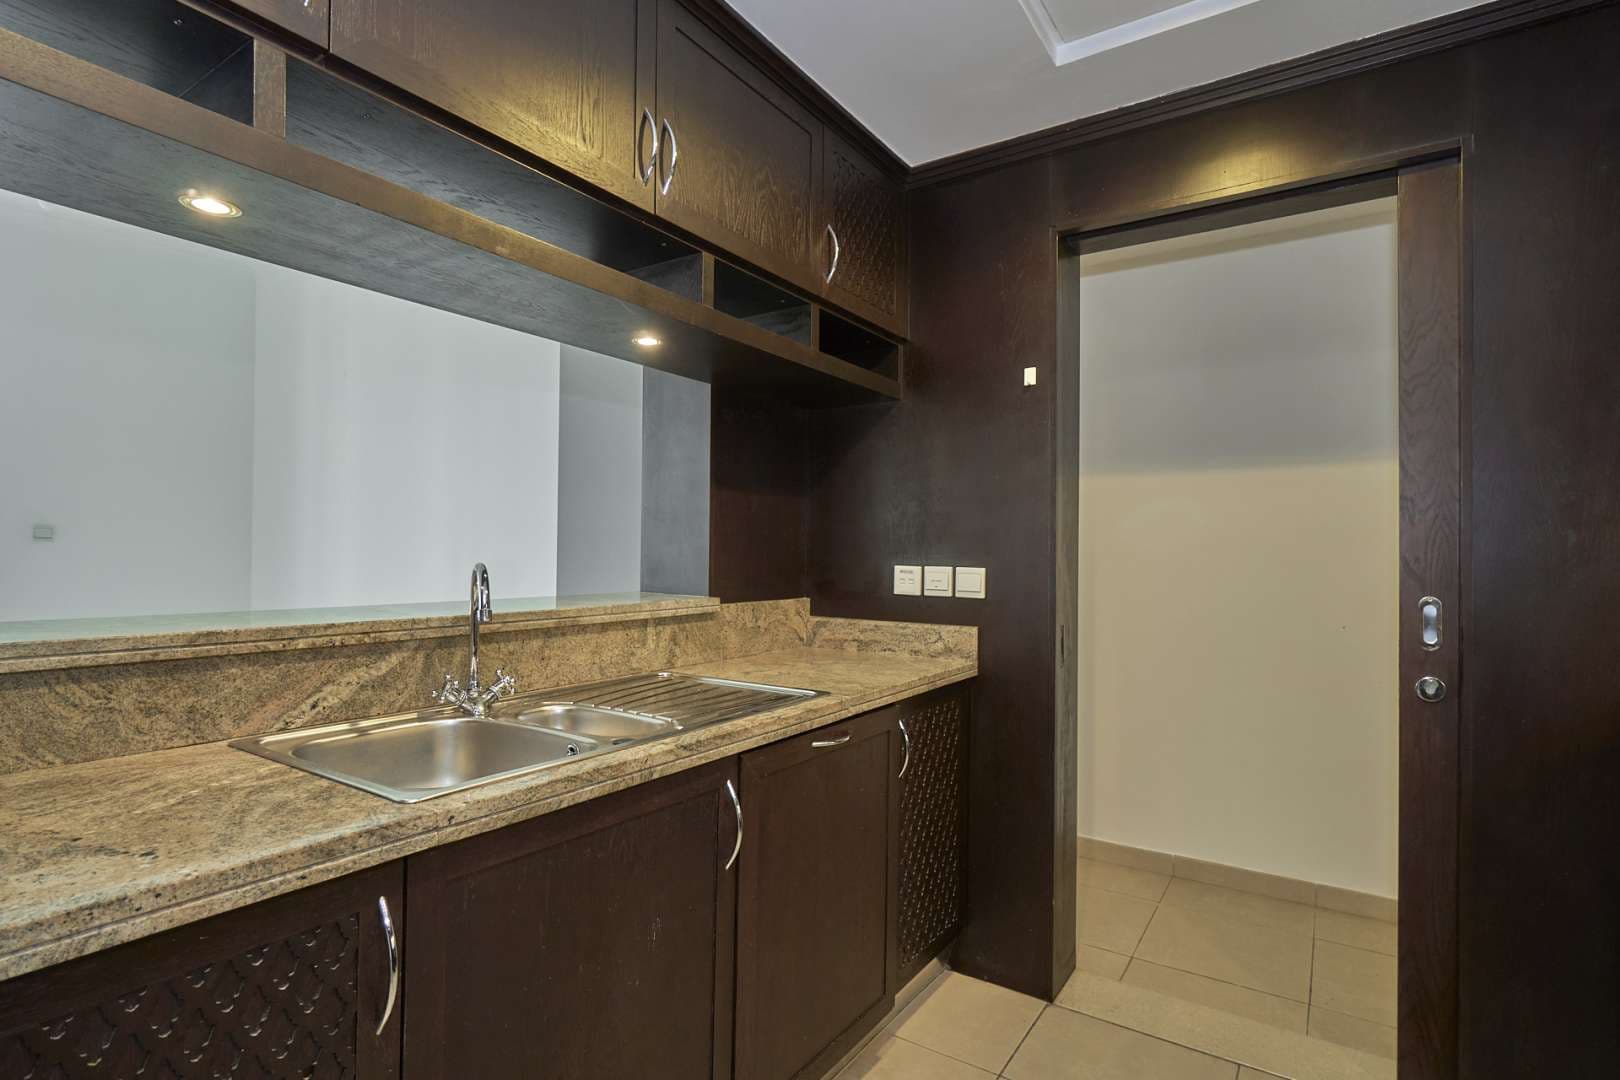 1 Bedroom Apartment For Rent The Residences Lp07968 5c0138494365600.jpg